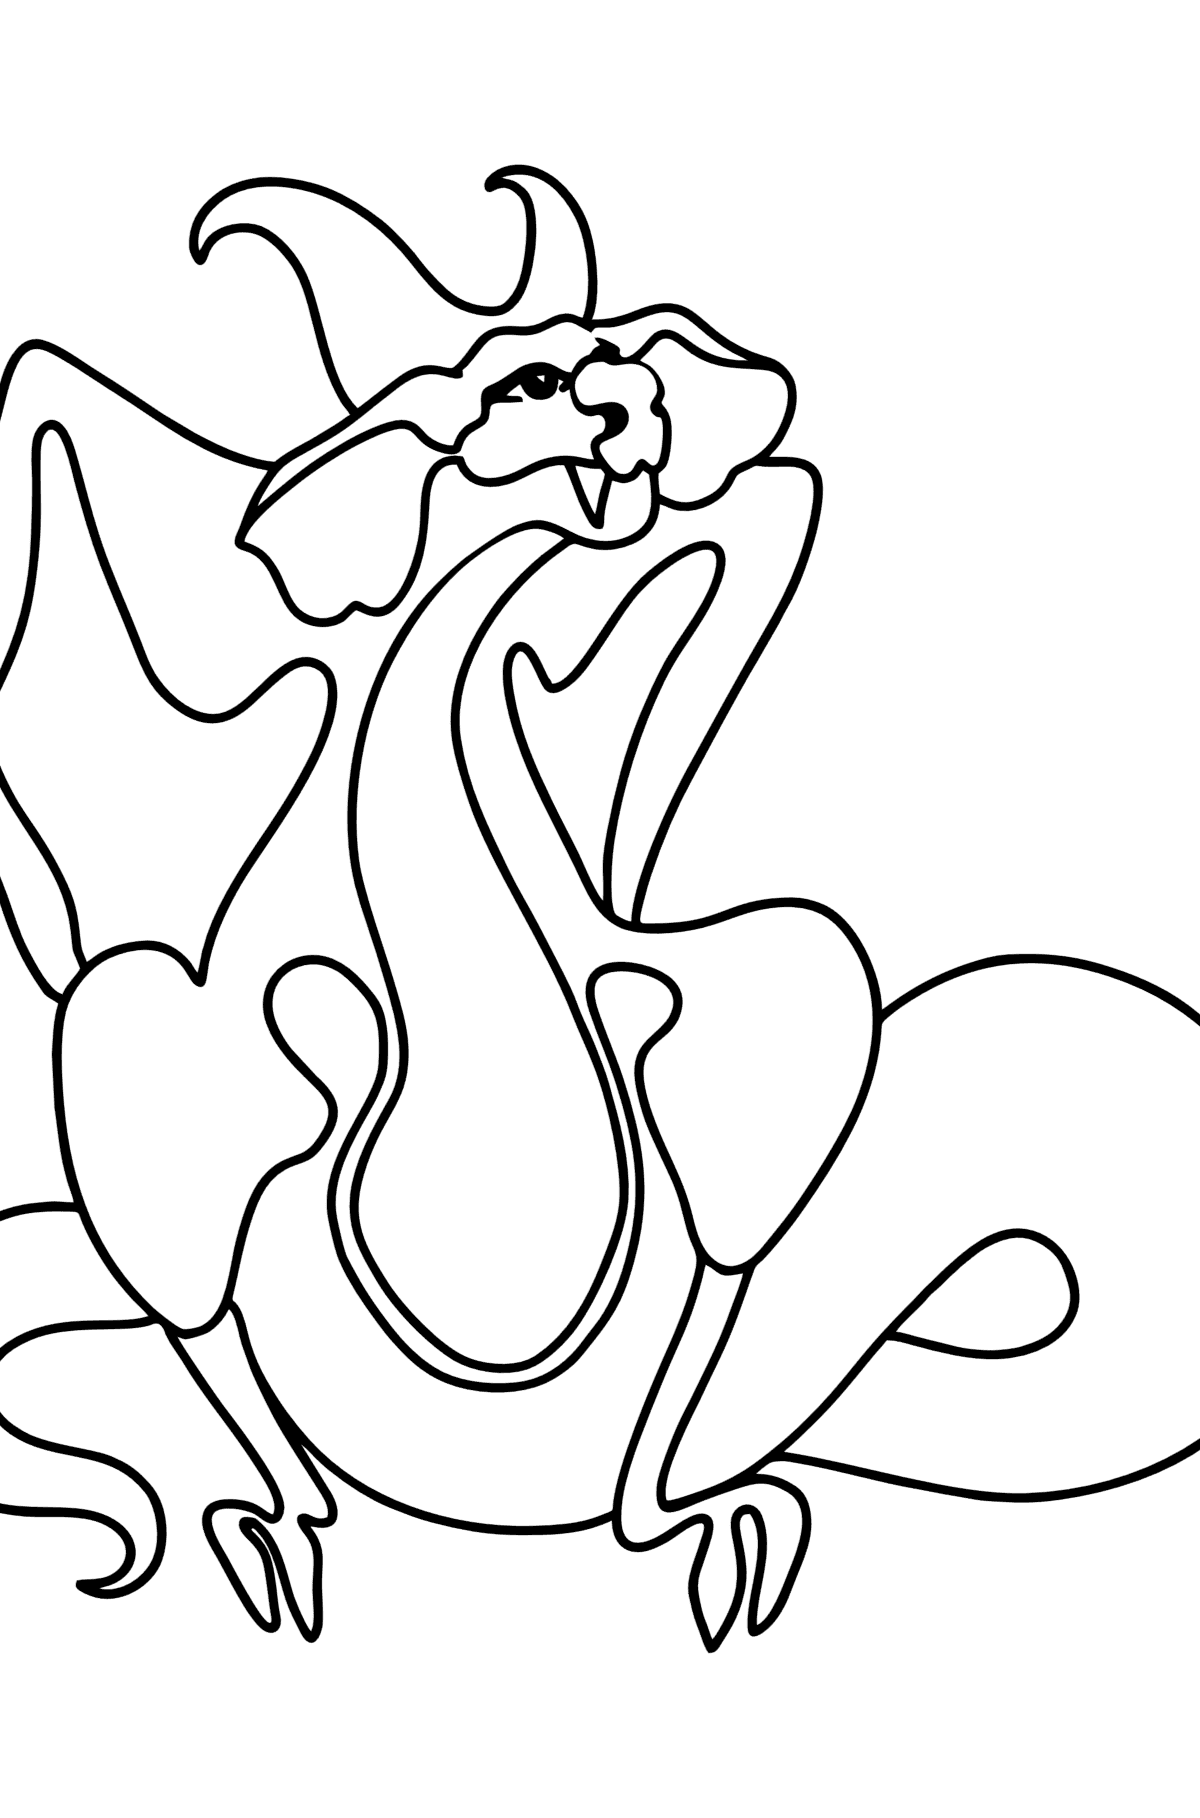 Sad Dragon coloring page - Coloring Pages for Kids